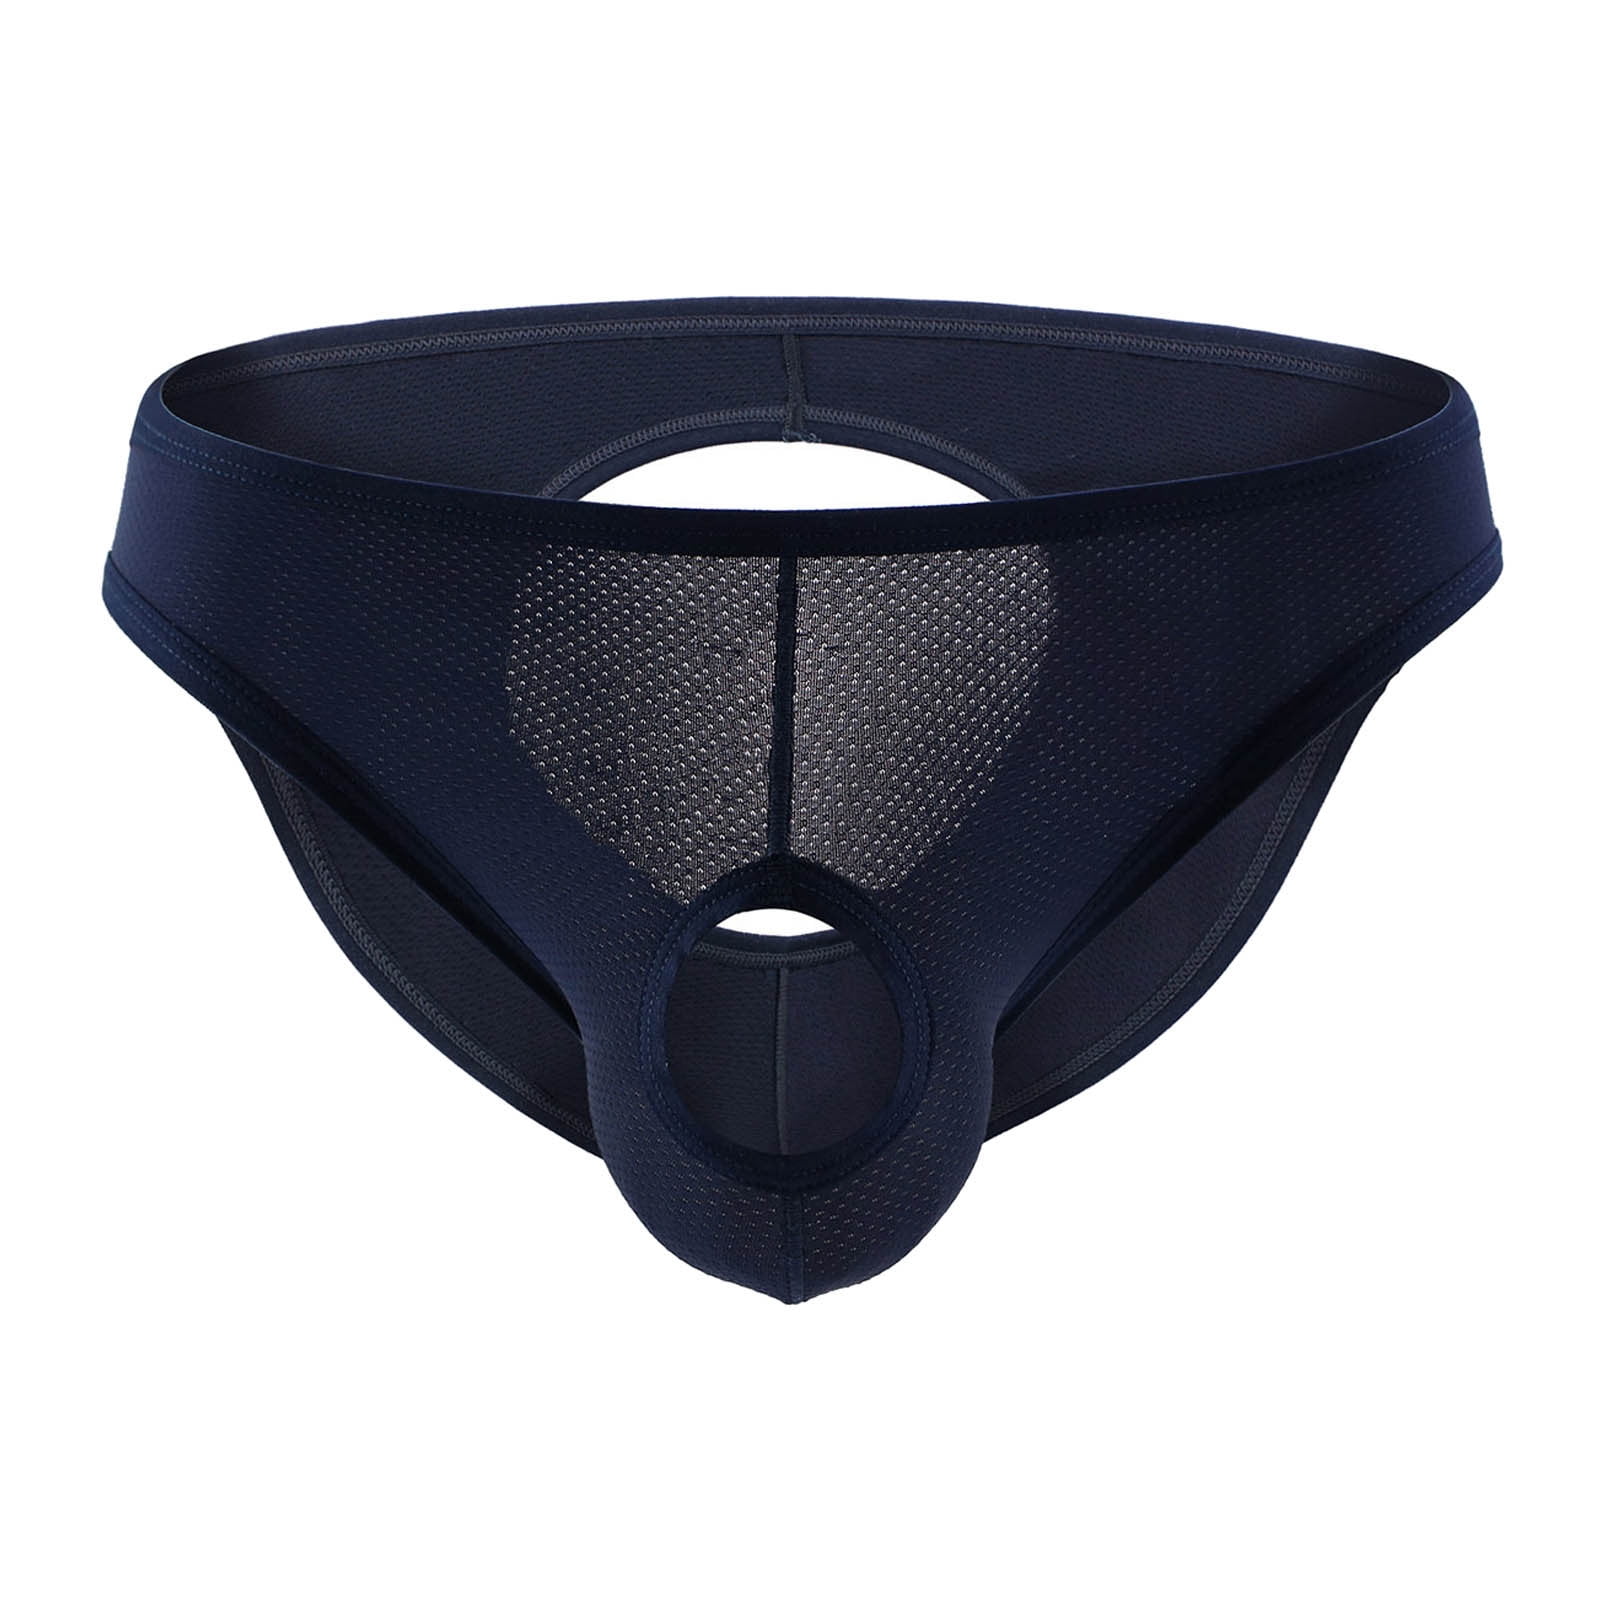 Men's Panties Shorts Front And Back Hollowed Out Exposing Design Briefs ...